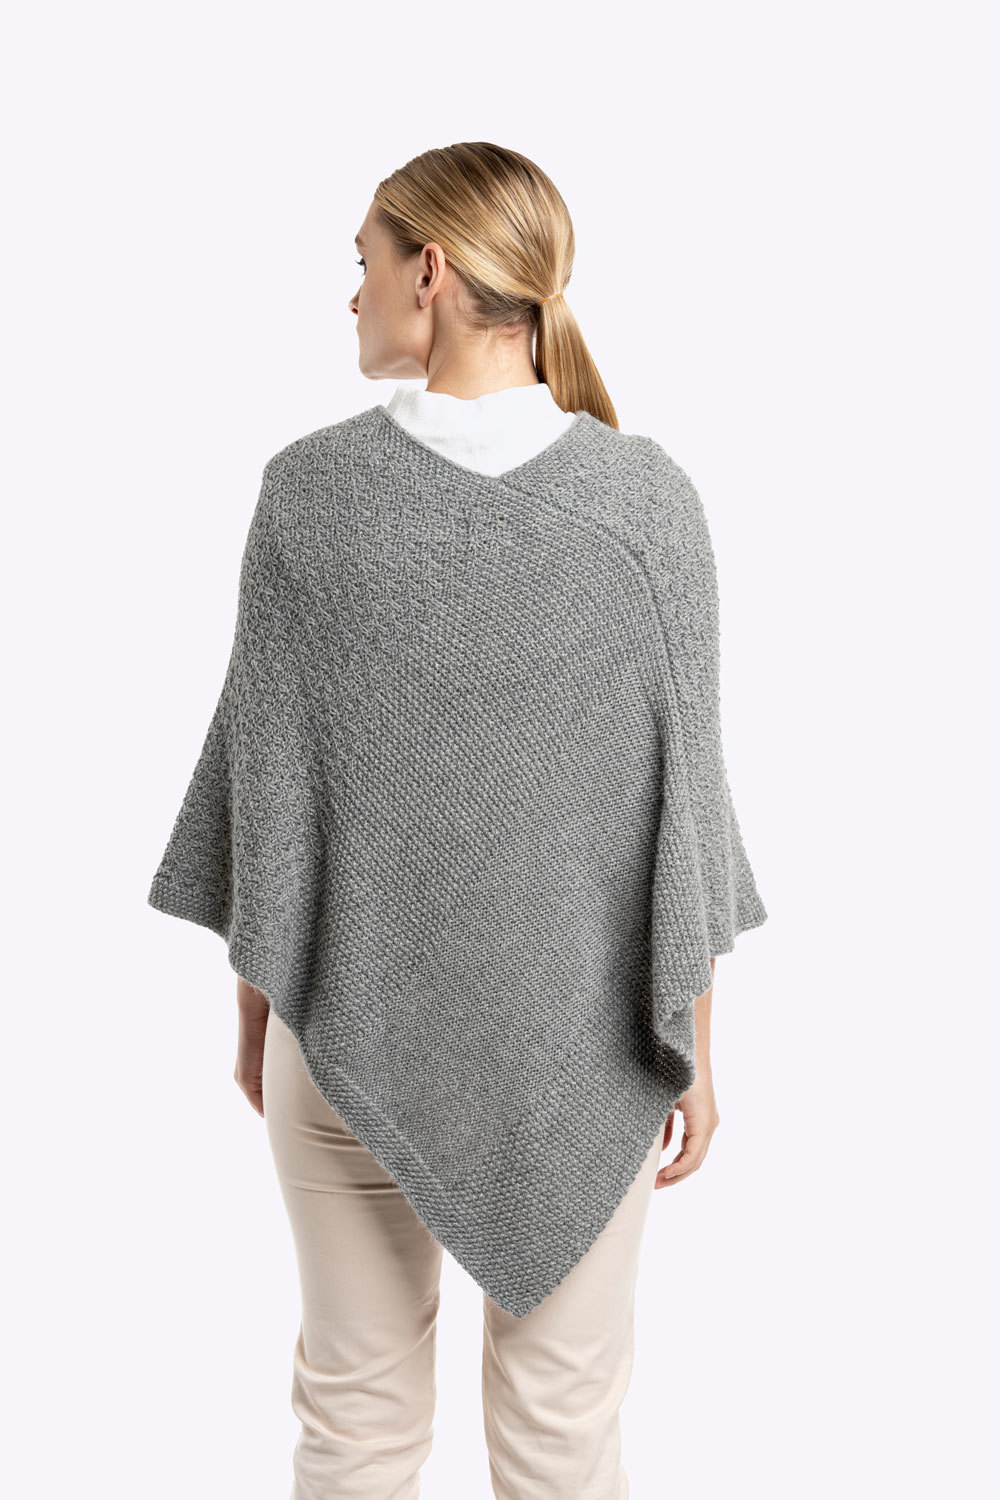 Ladies V-Neck Knitted Poncho - Silver - 3